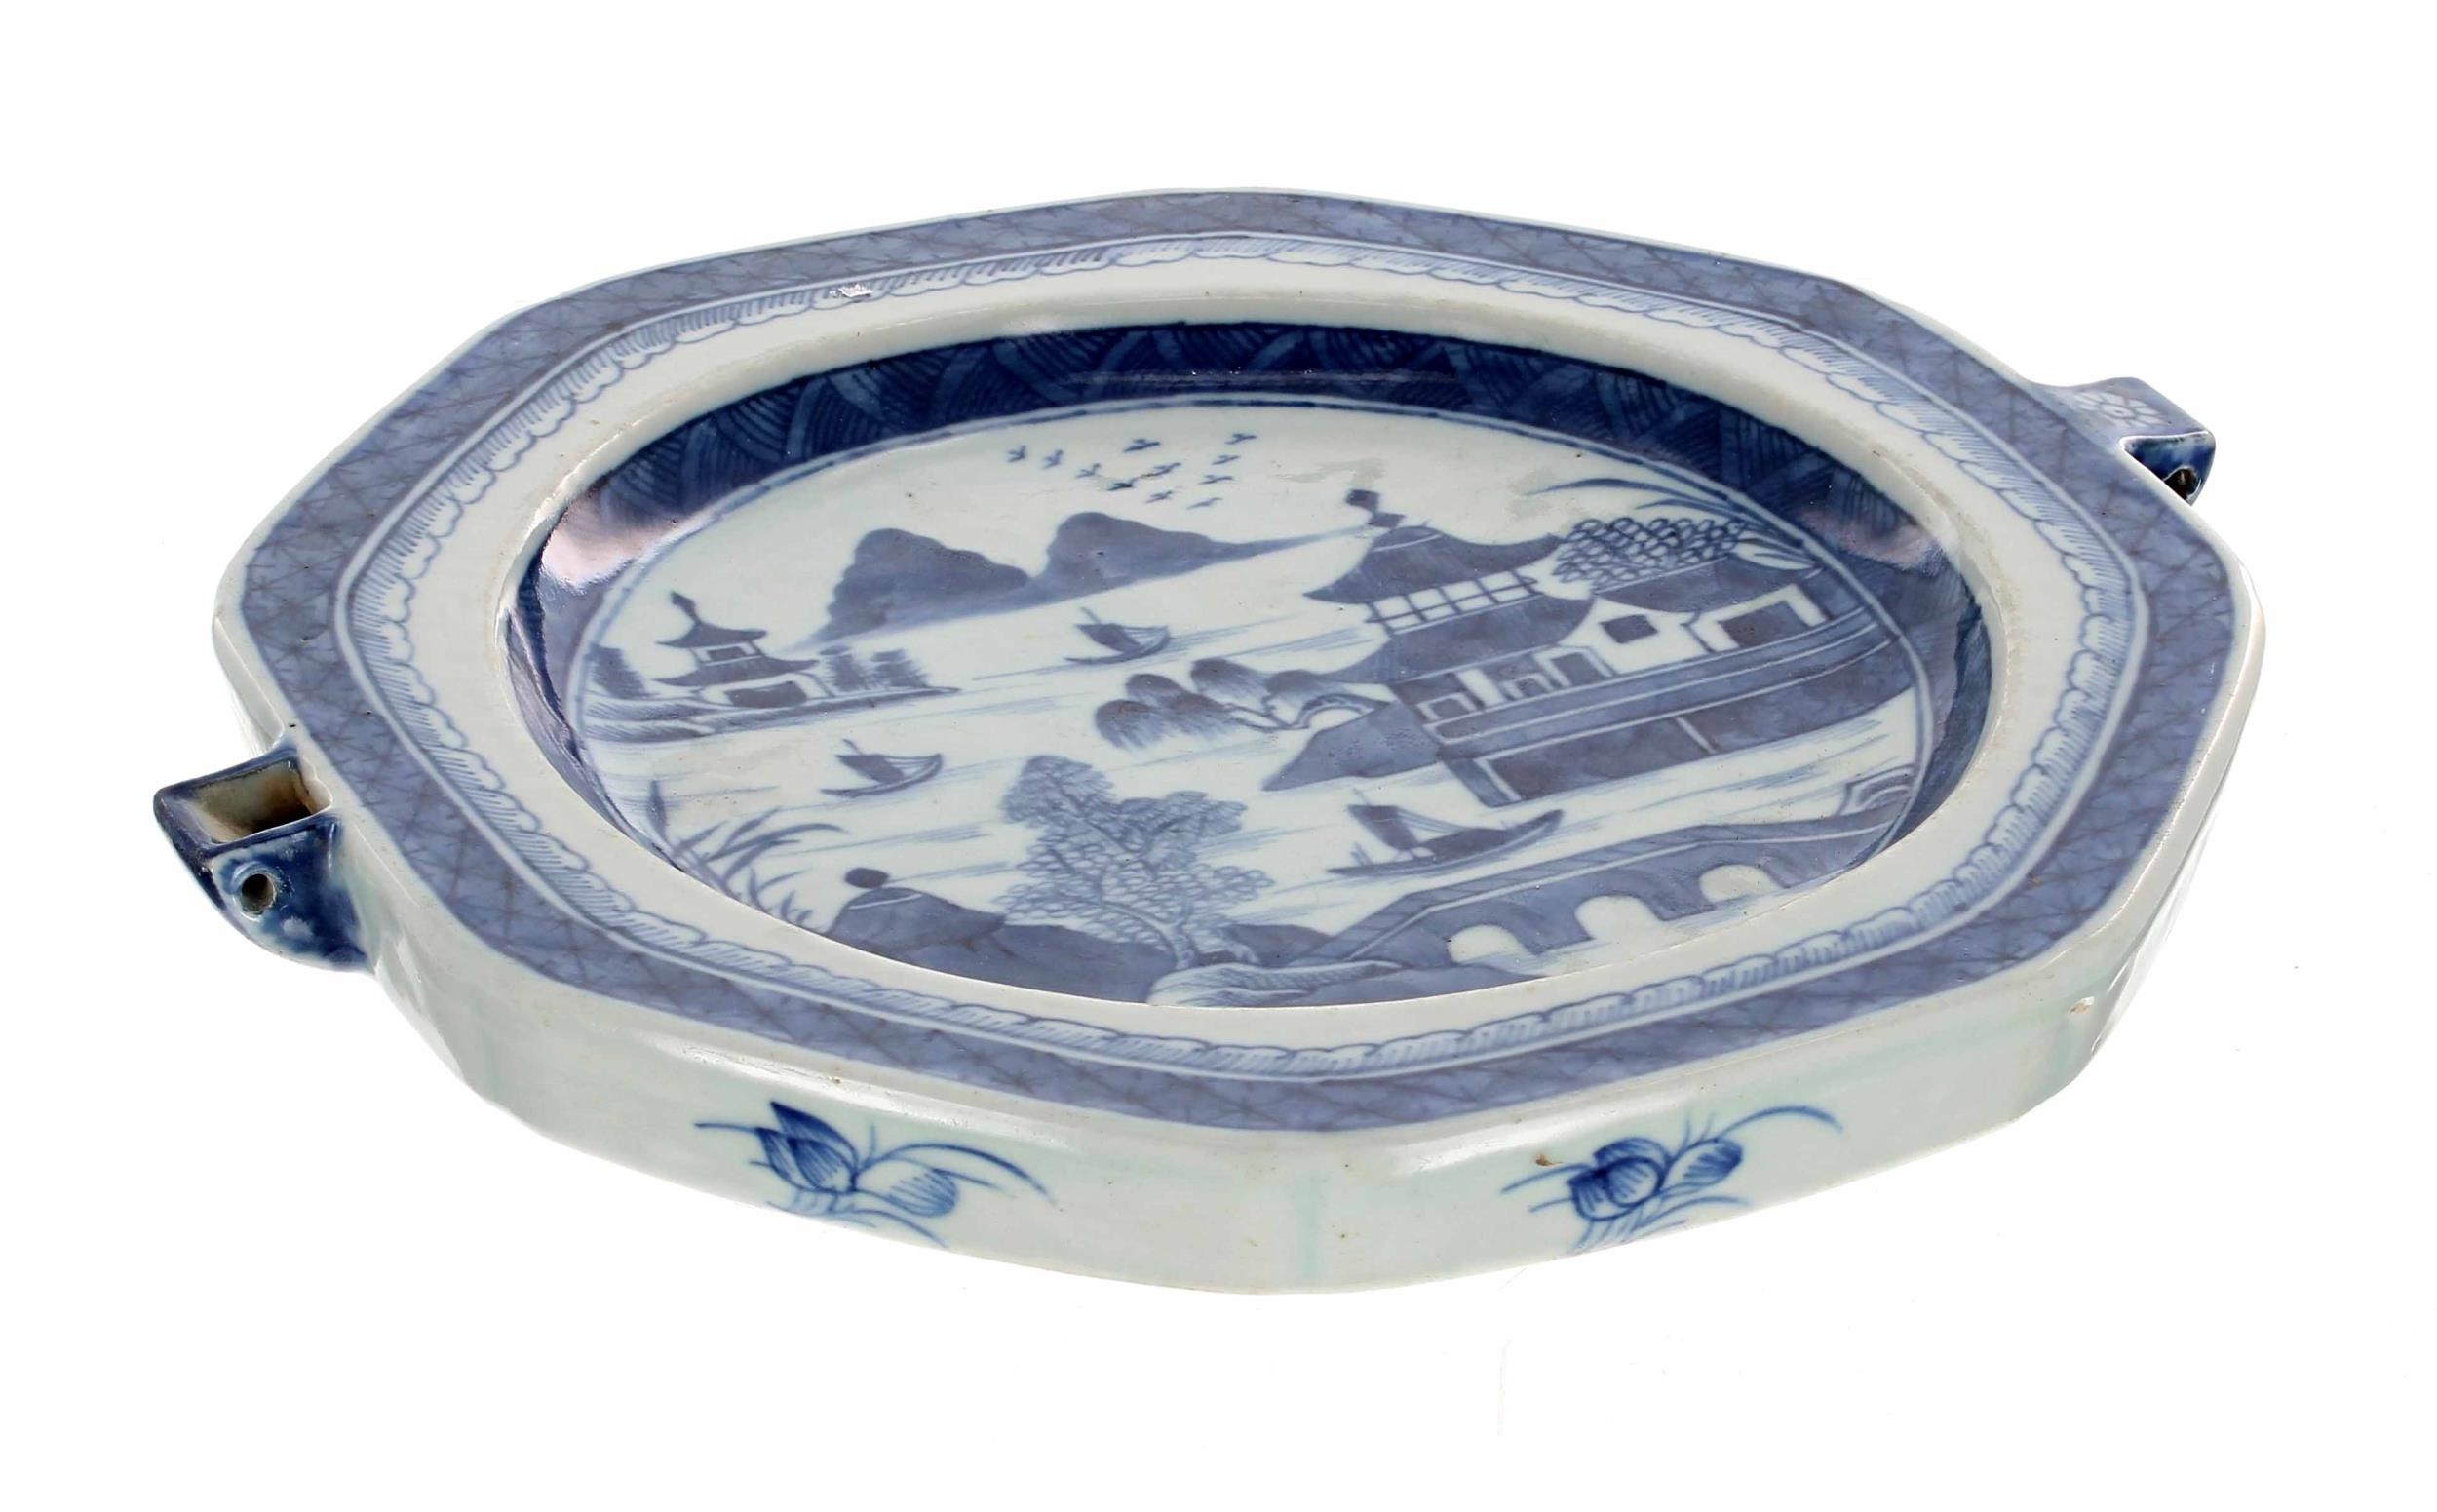 Pair of Chinese export blue and white export porcelain octagonal warming plates, decorated with